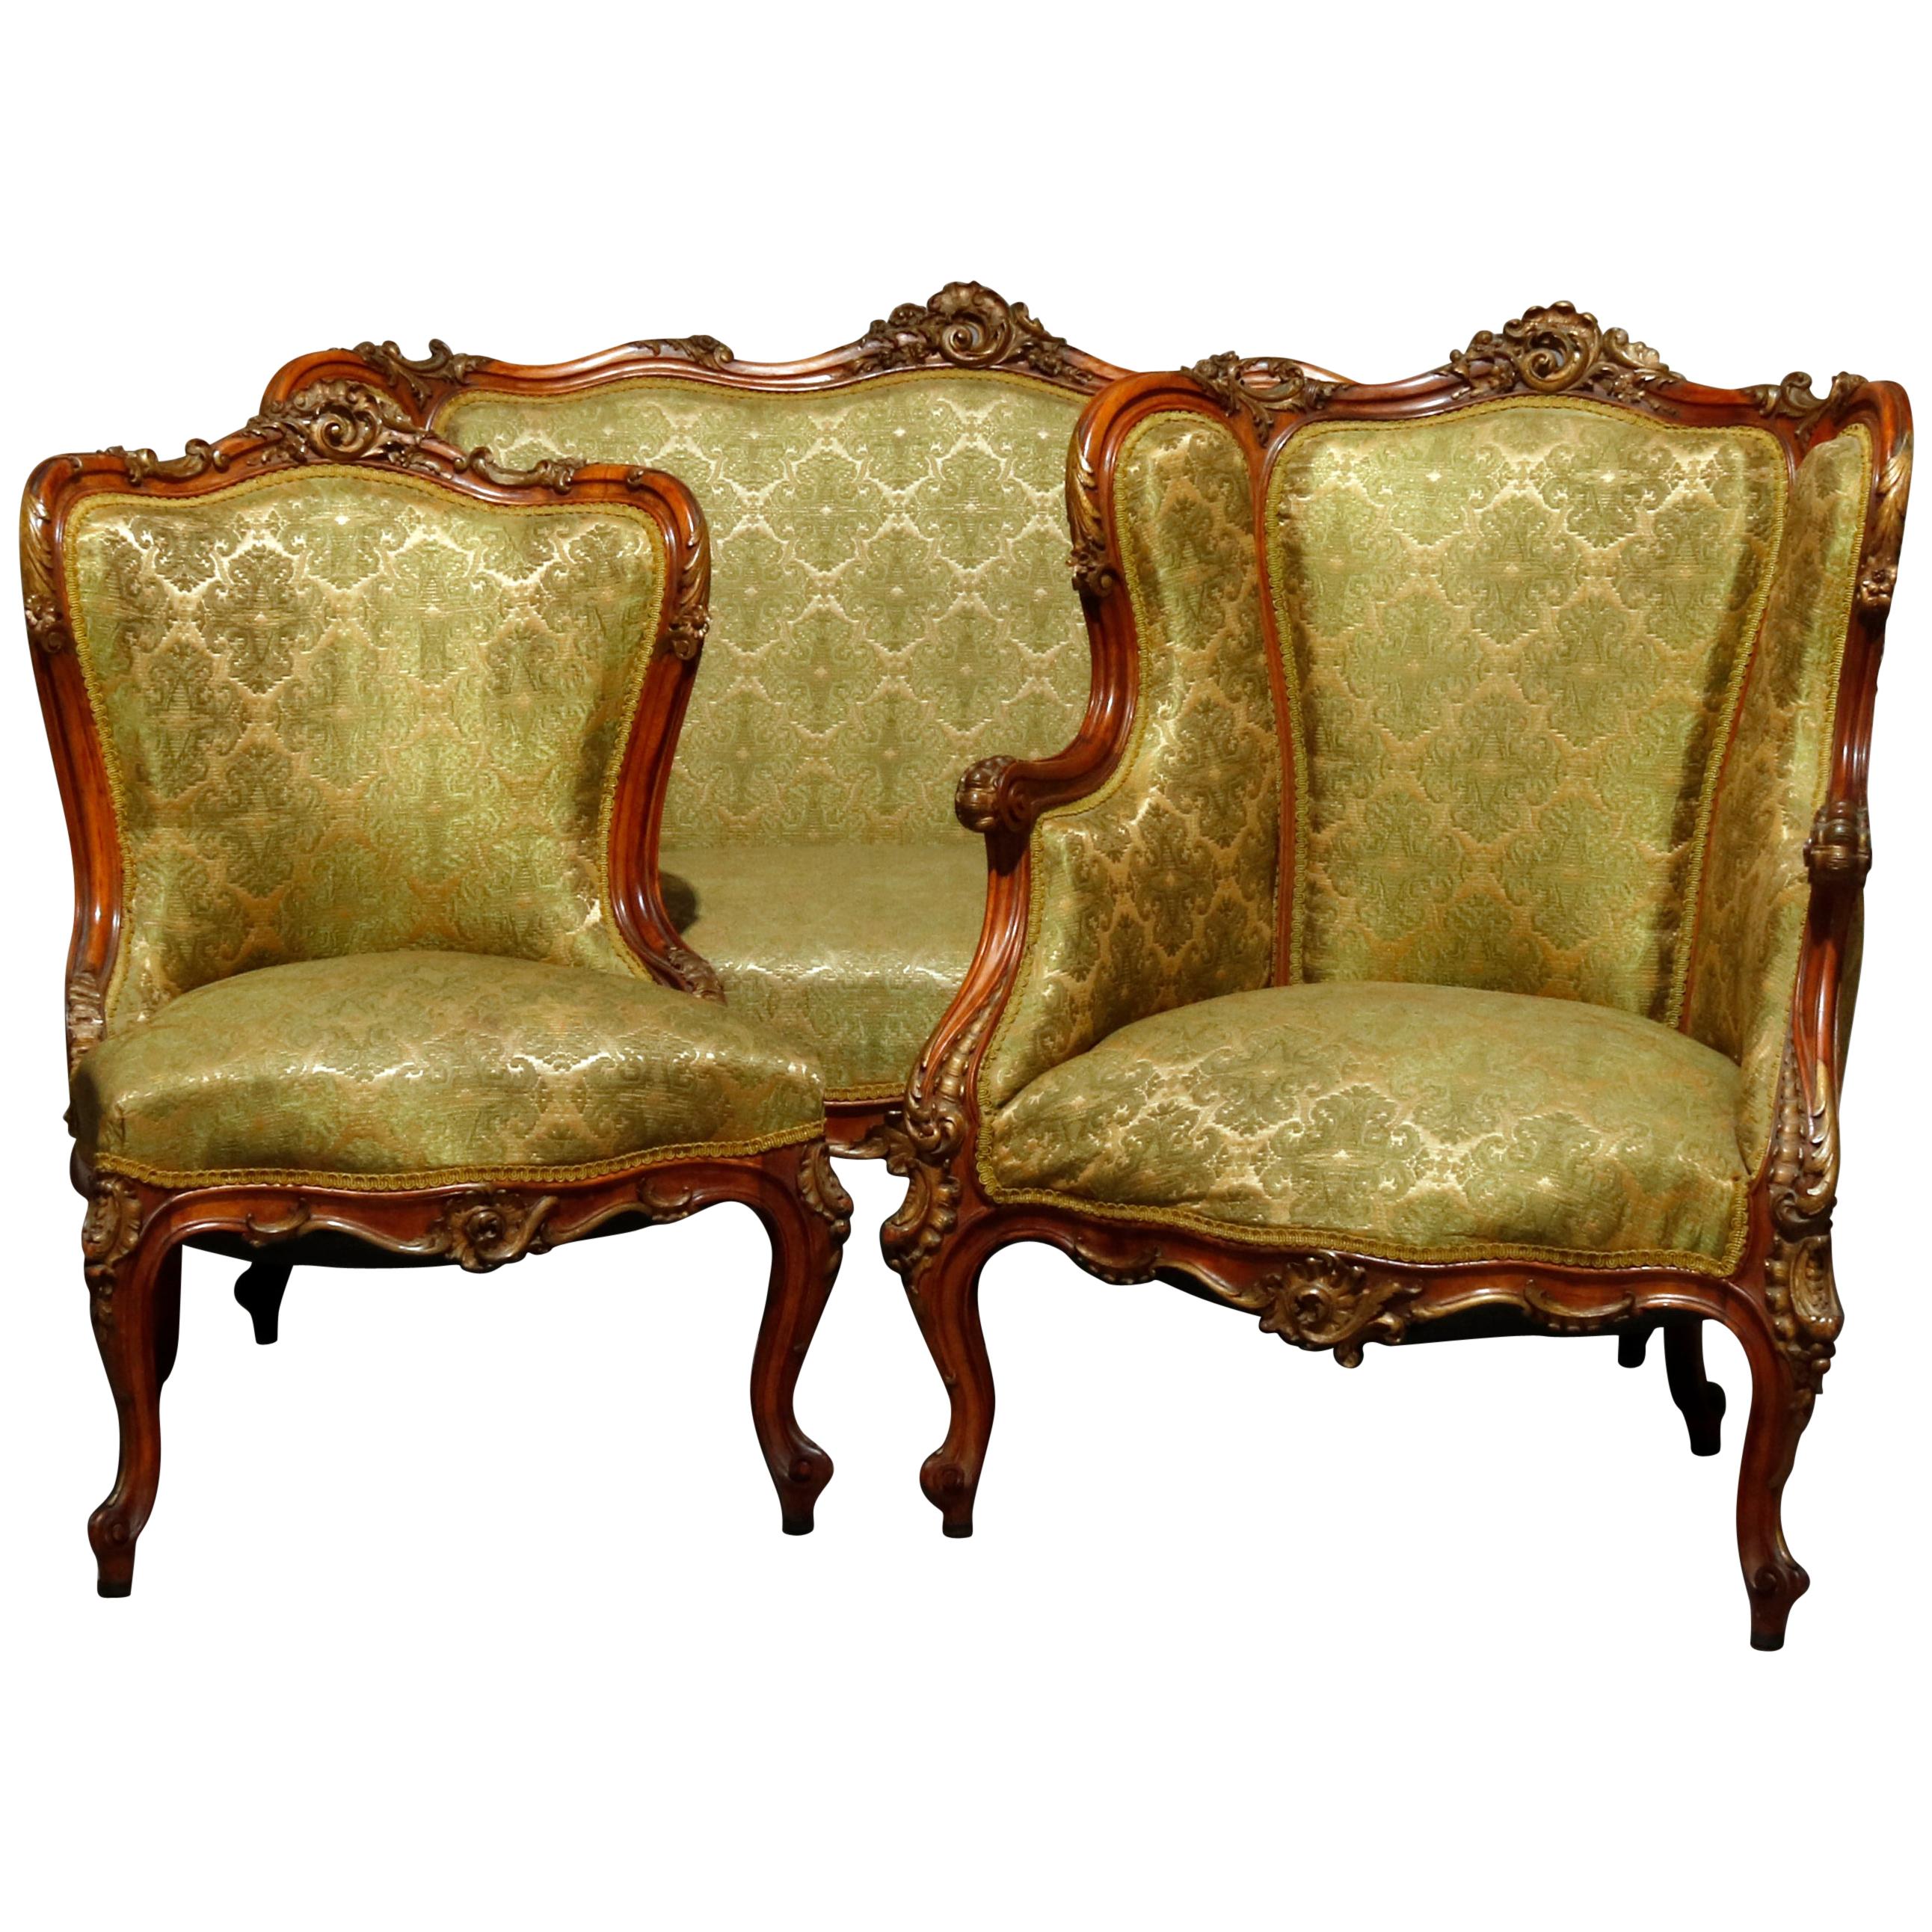 French Louis XV Parcel Gilt Carved Walnut 3-Piece Parlor Set, 19th Century